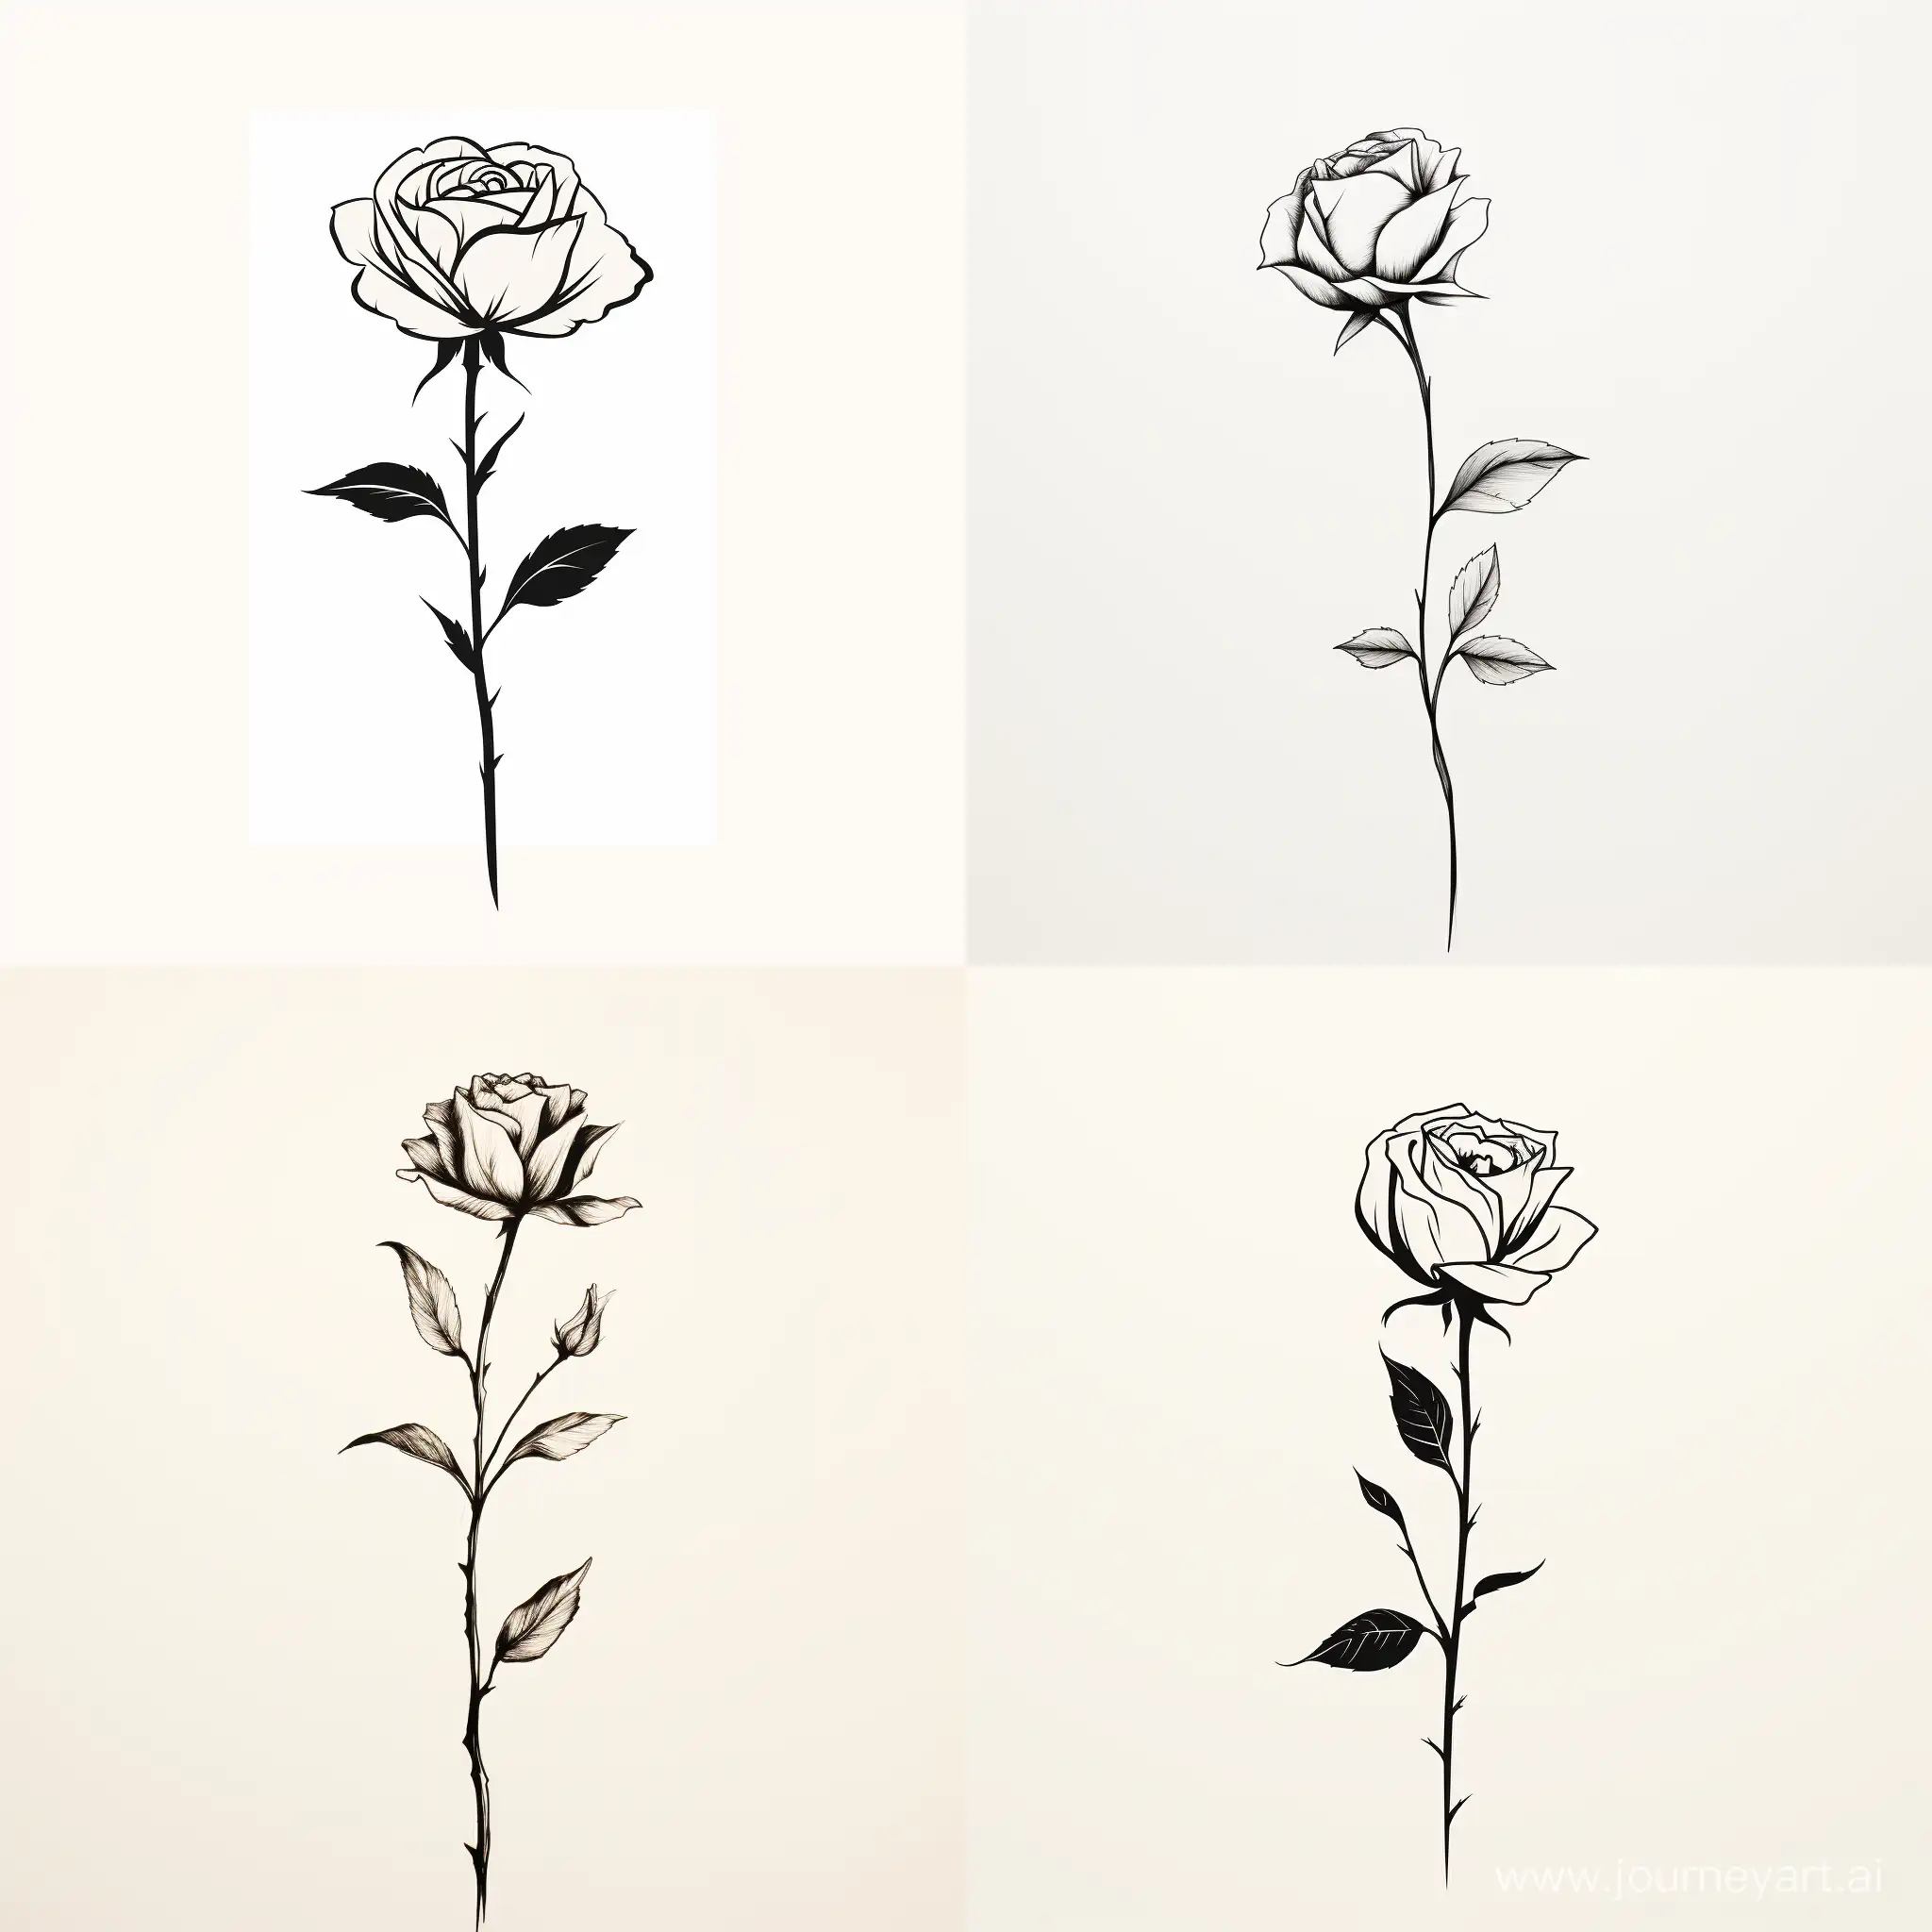 minimalist black line art of a rose on a white background